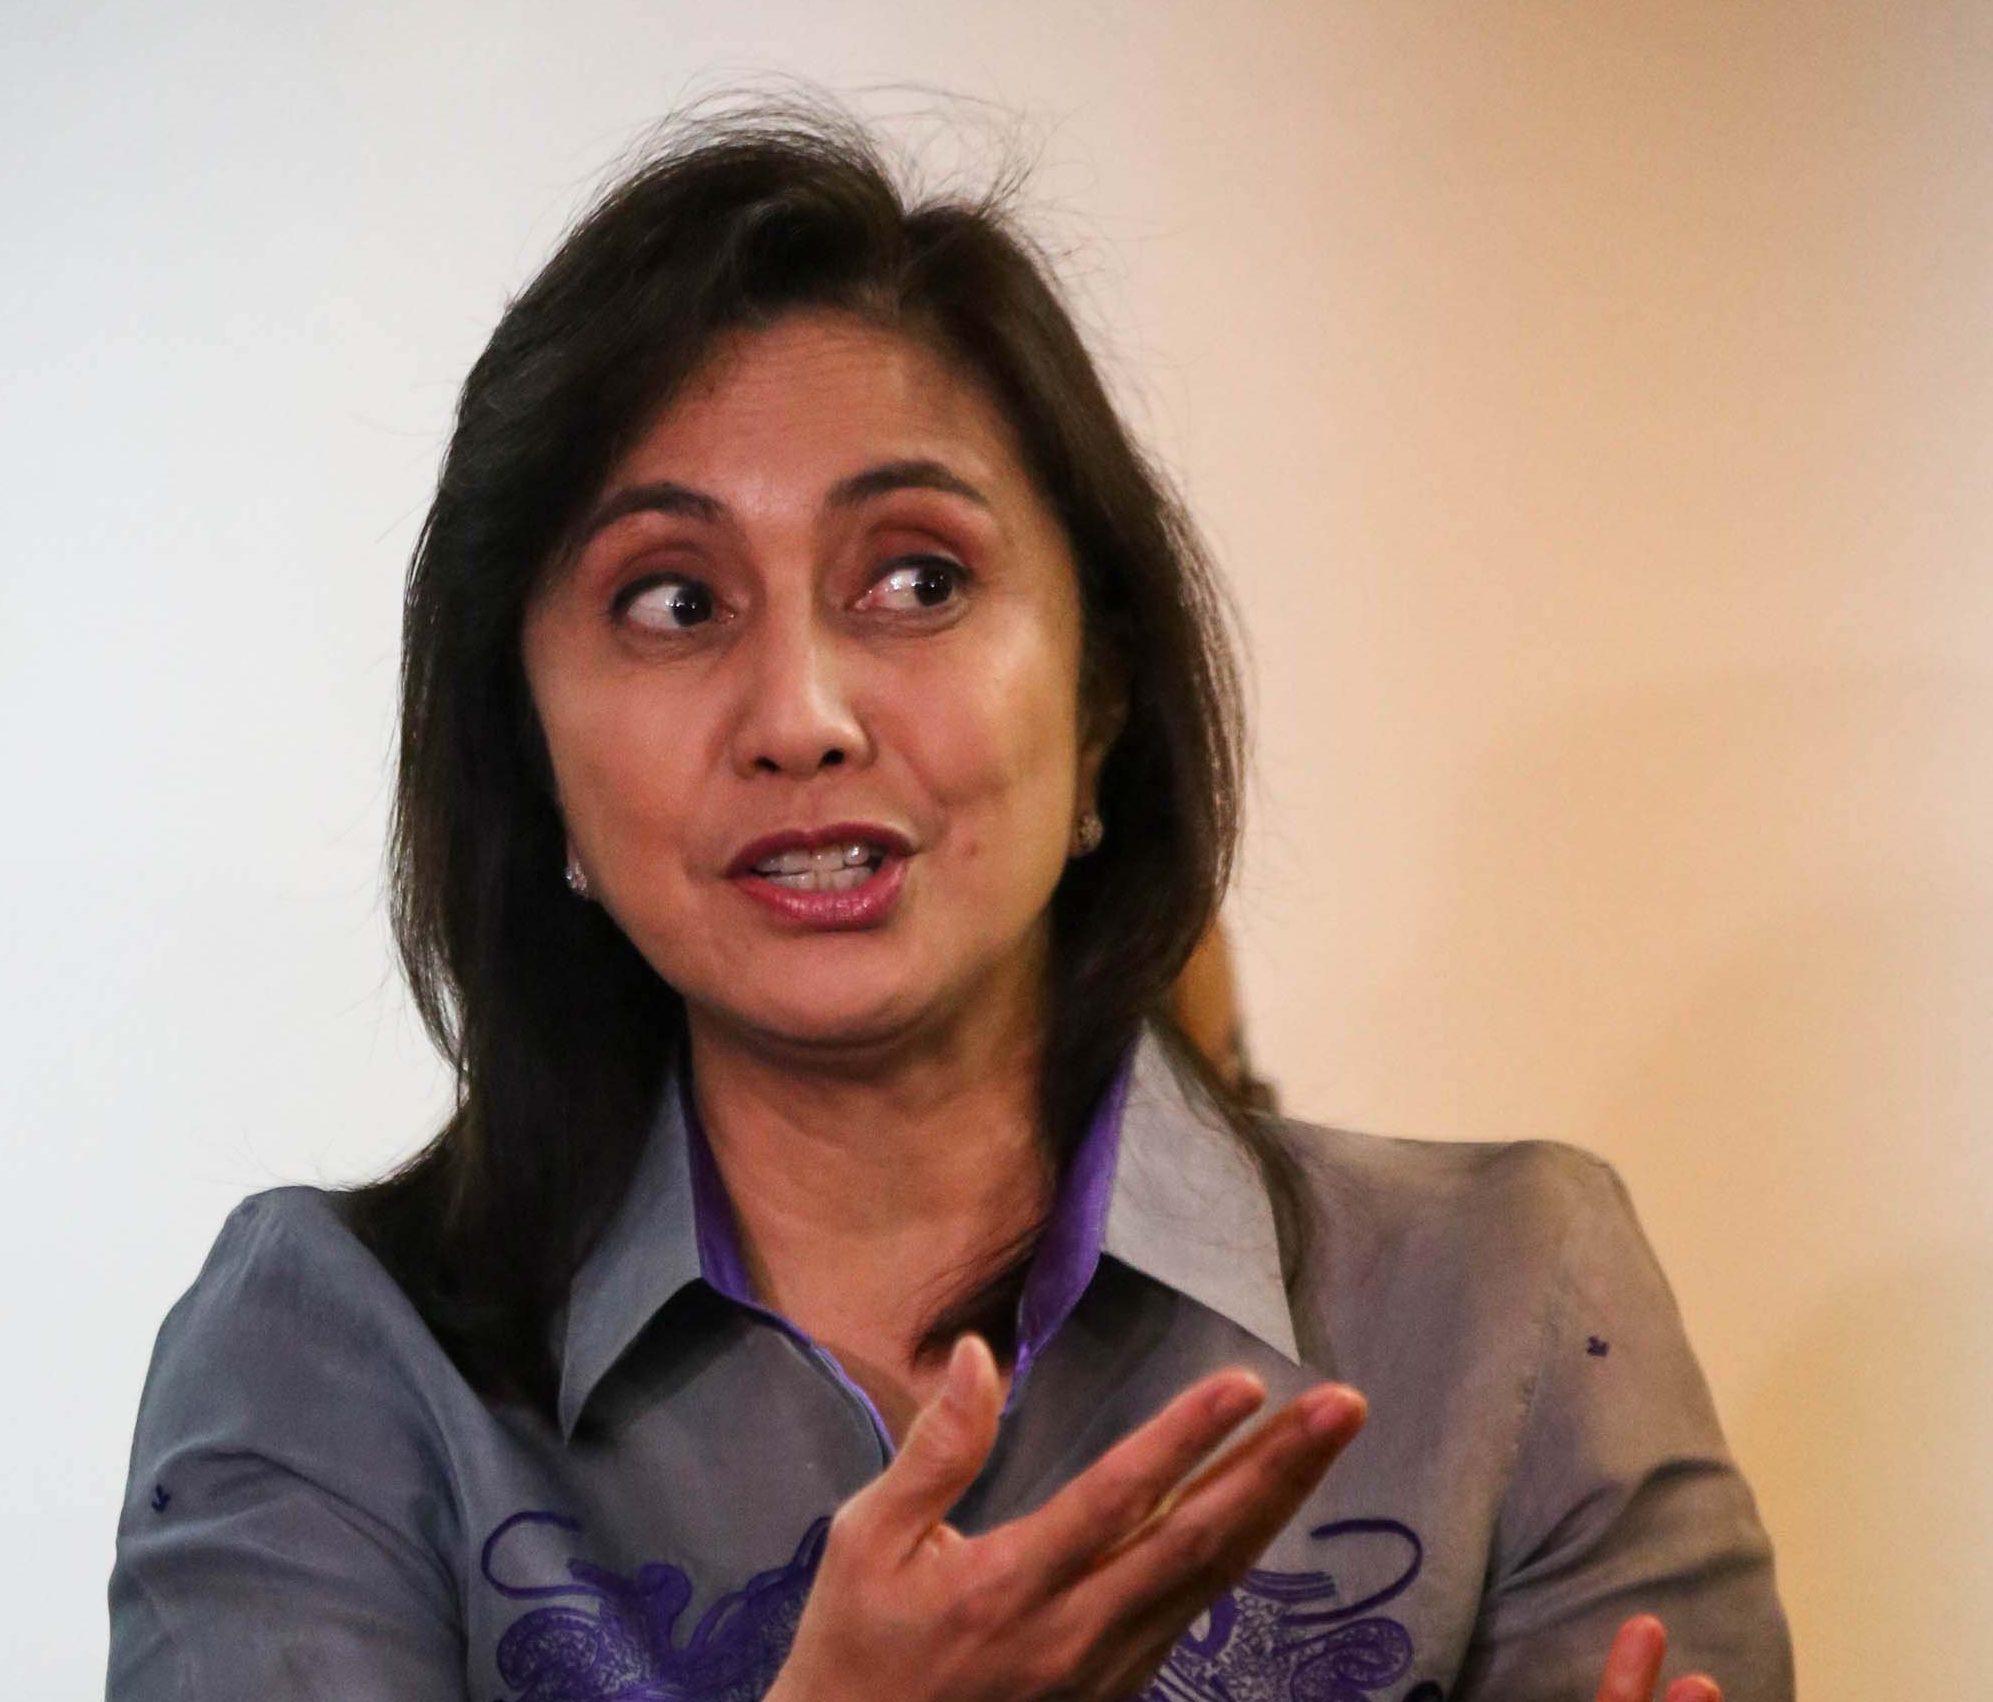 LP should be recognized as House minority bloc - Robredo